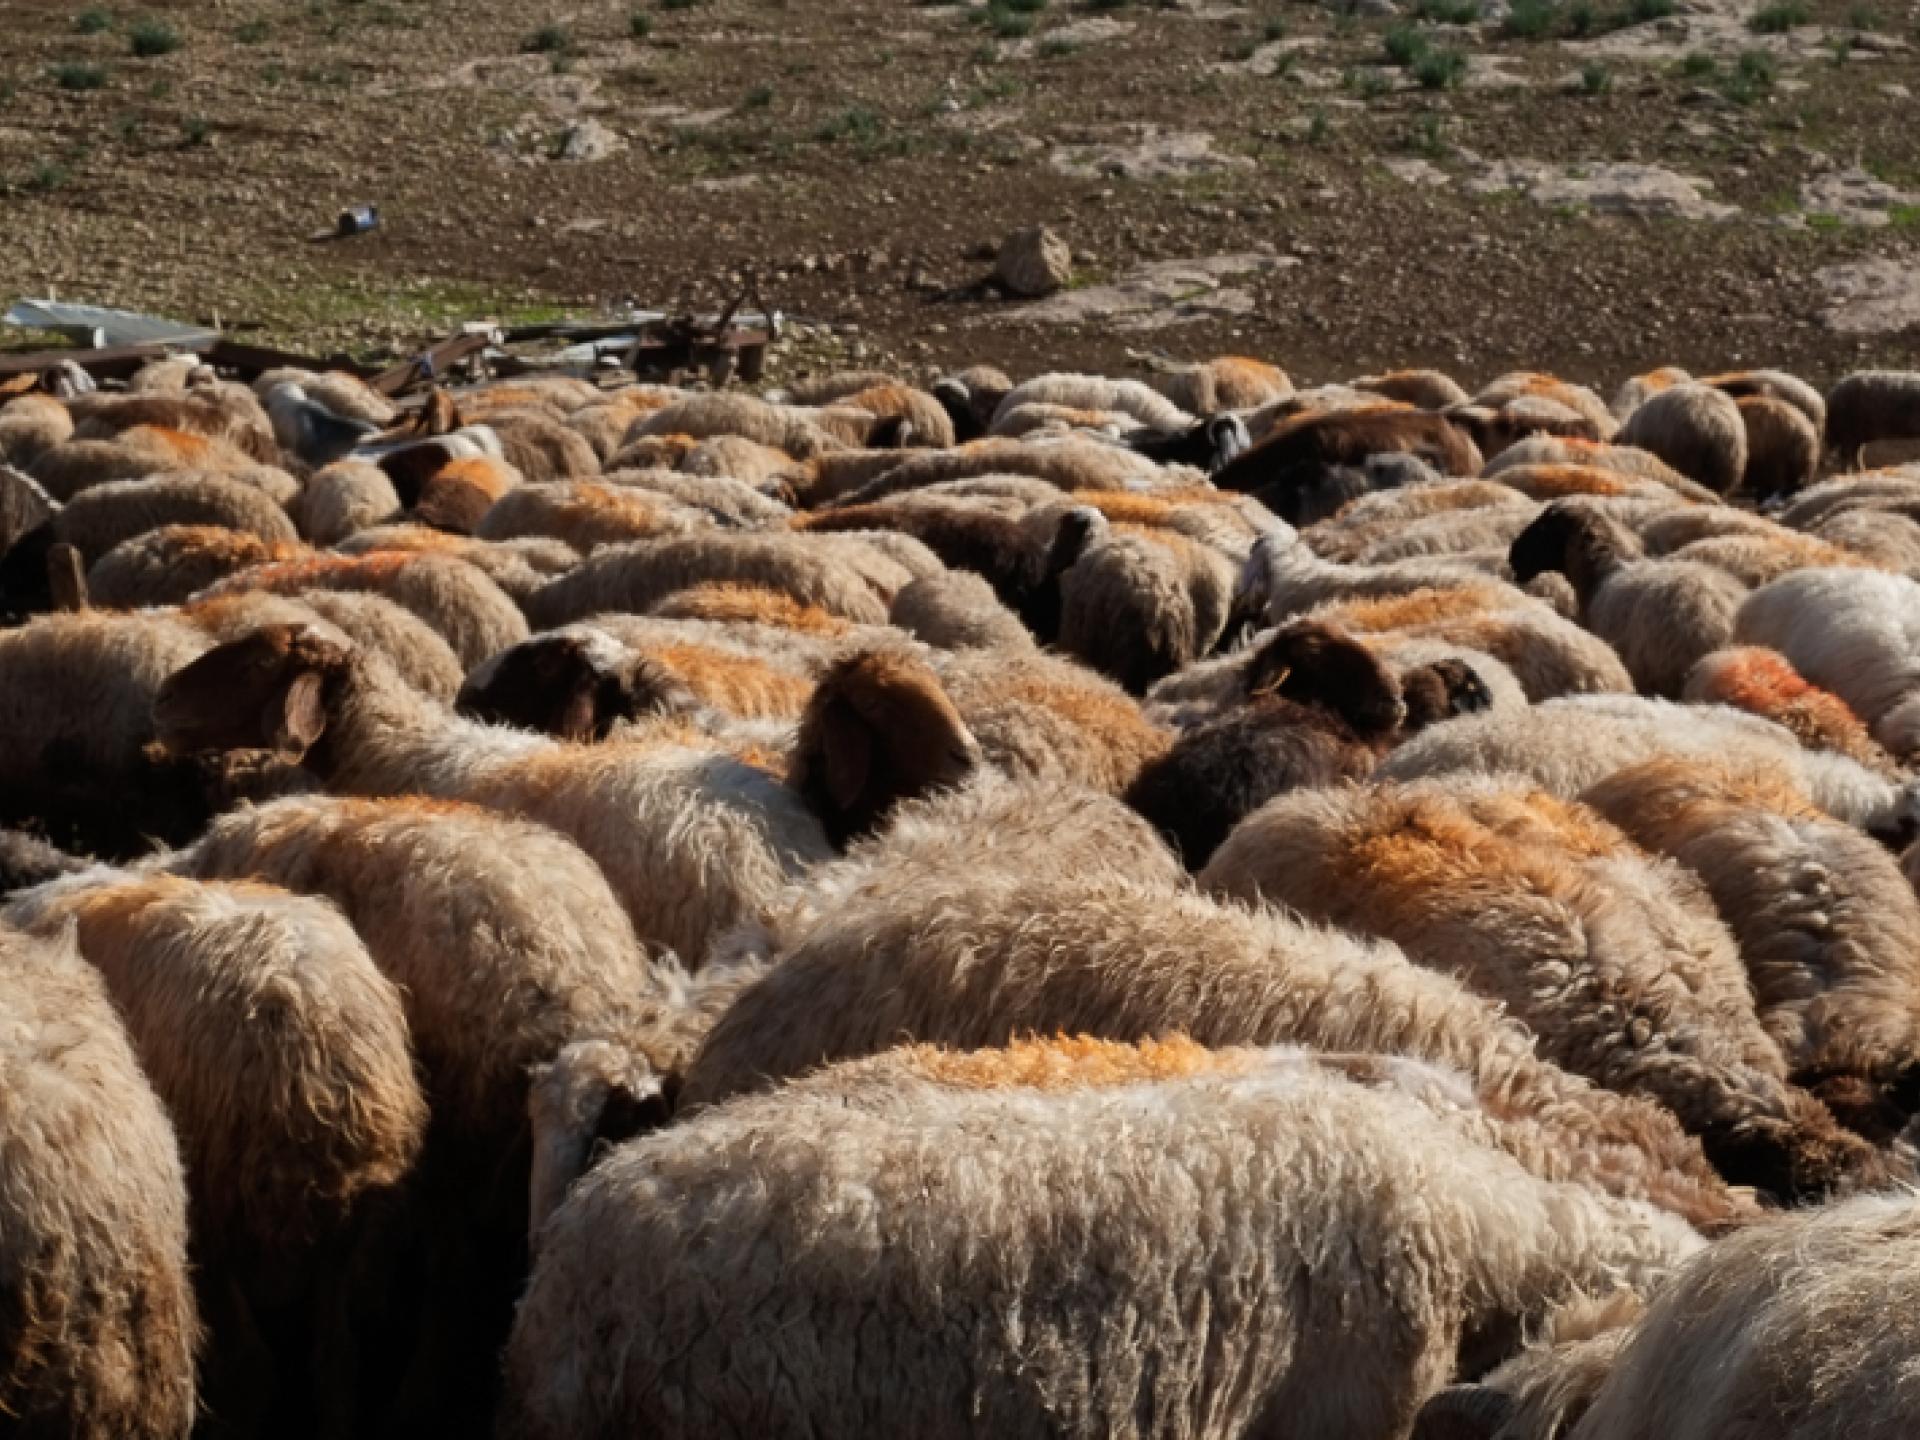 The Jordan Valley: sheep who survived the  plague epidemic